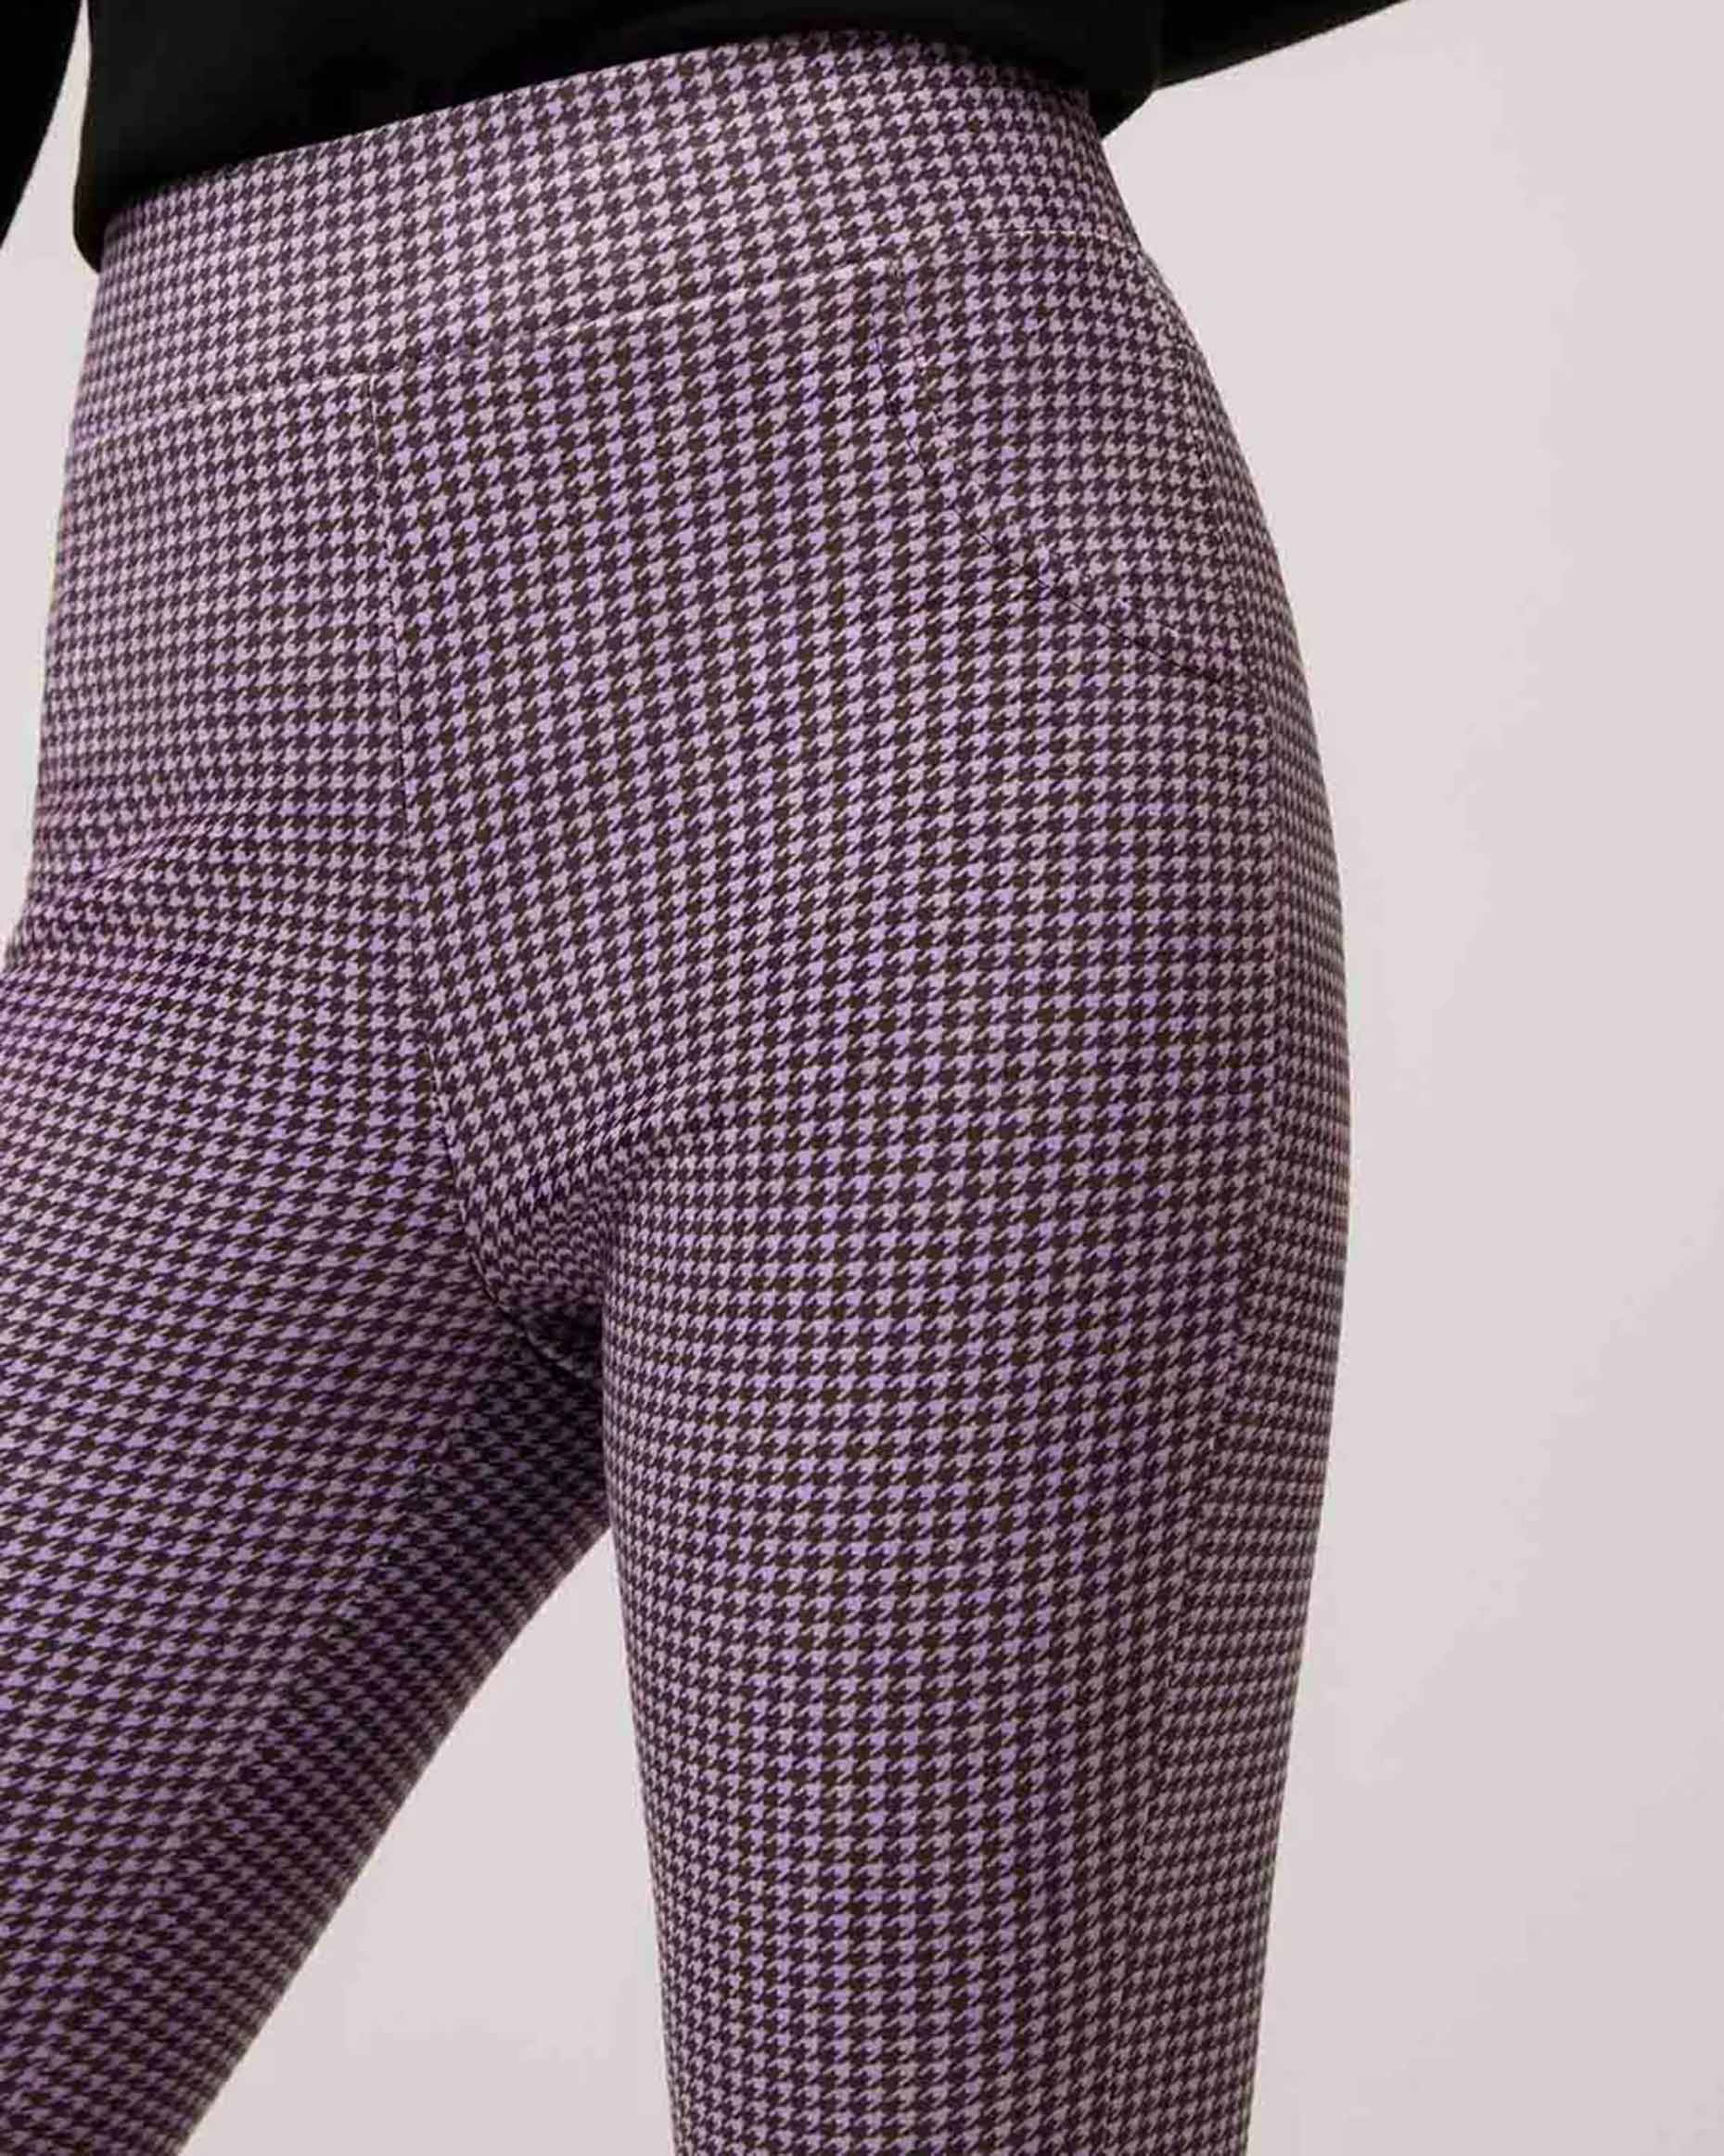 Ysabel Mora 70402 Houndstooth Leggings - High waisted purple trouser leggings detail with faux front pockets.